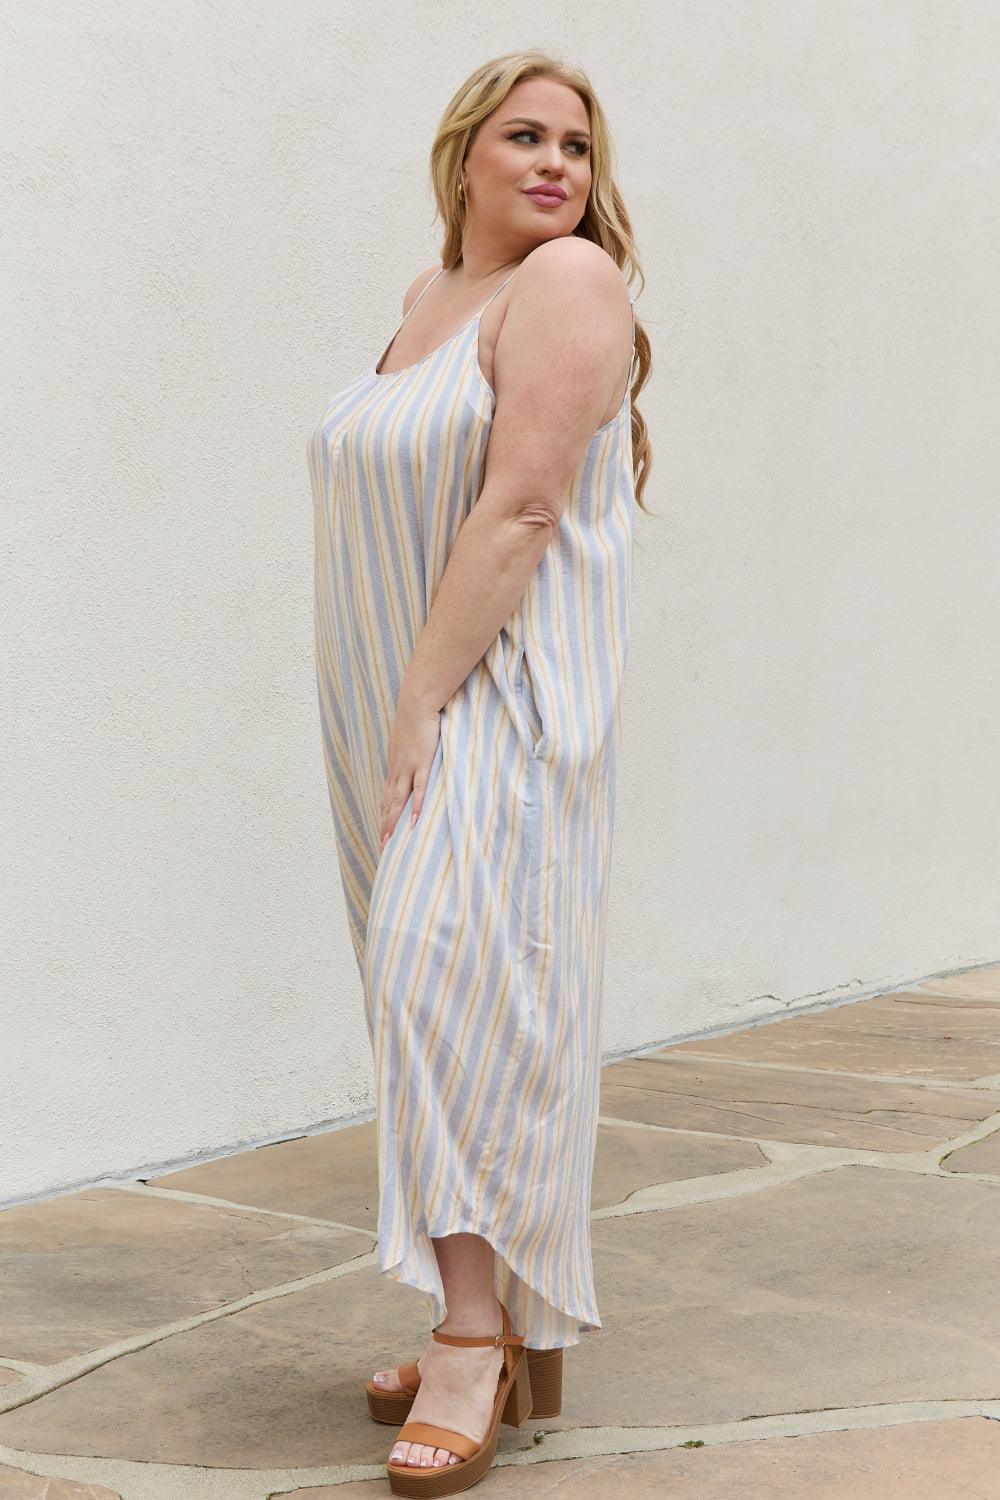 HEYSON Full Size Multi Colored Striped Jumpsuit with Pockets - The Fiery Jasmine